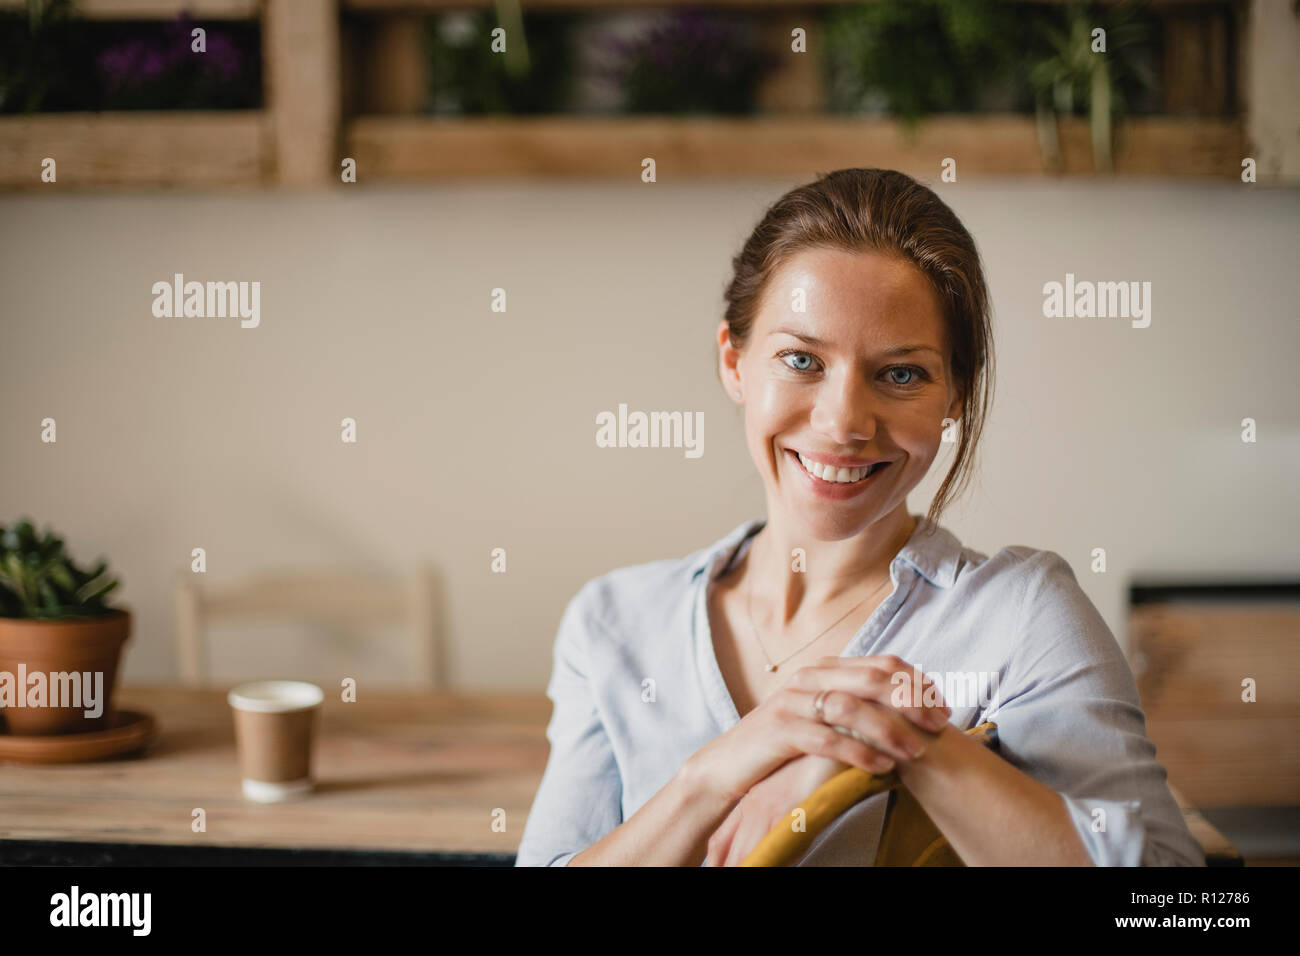 Headshot of a mid adult woman sitting indoors in a small coffee shop. She is looking at the camera and smiling. Stock Photo